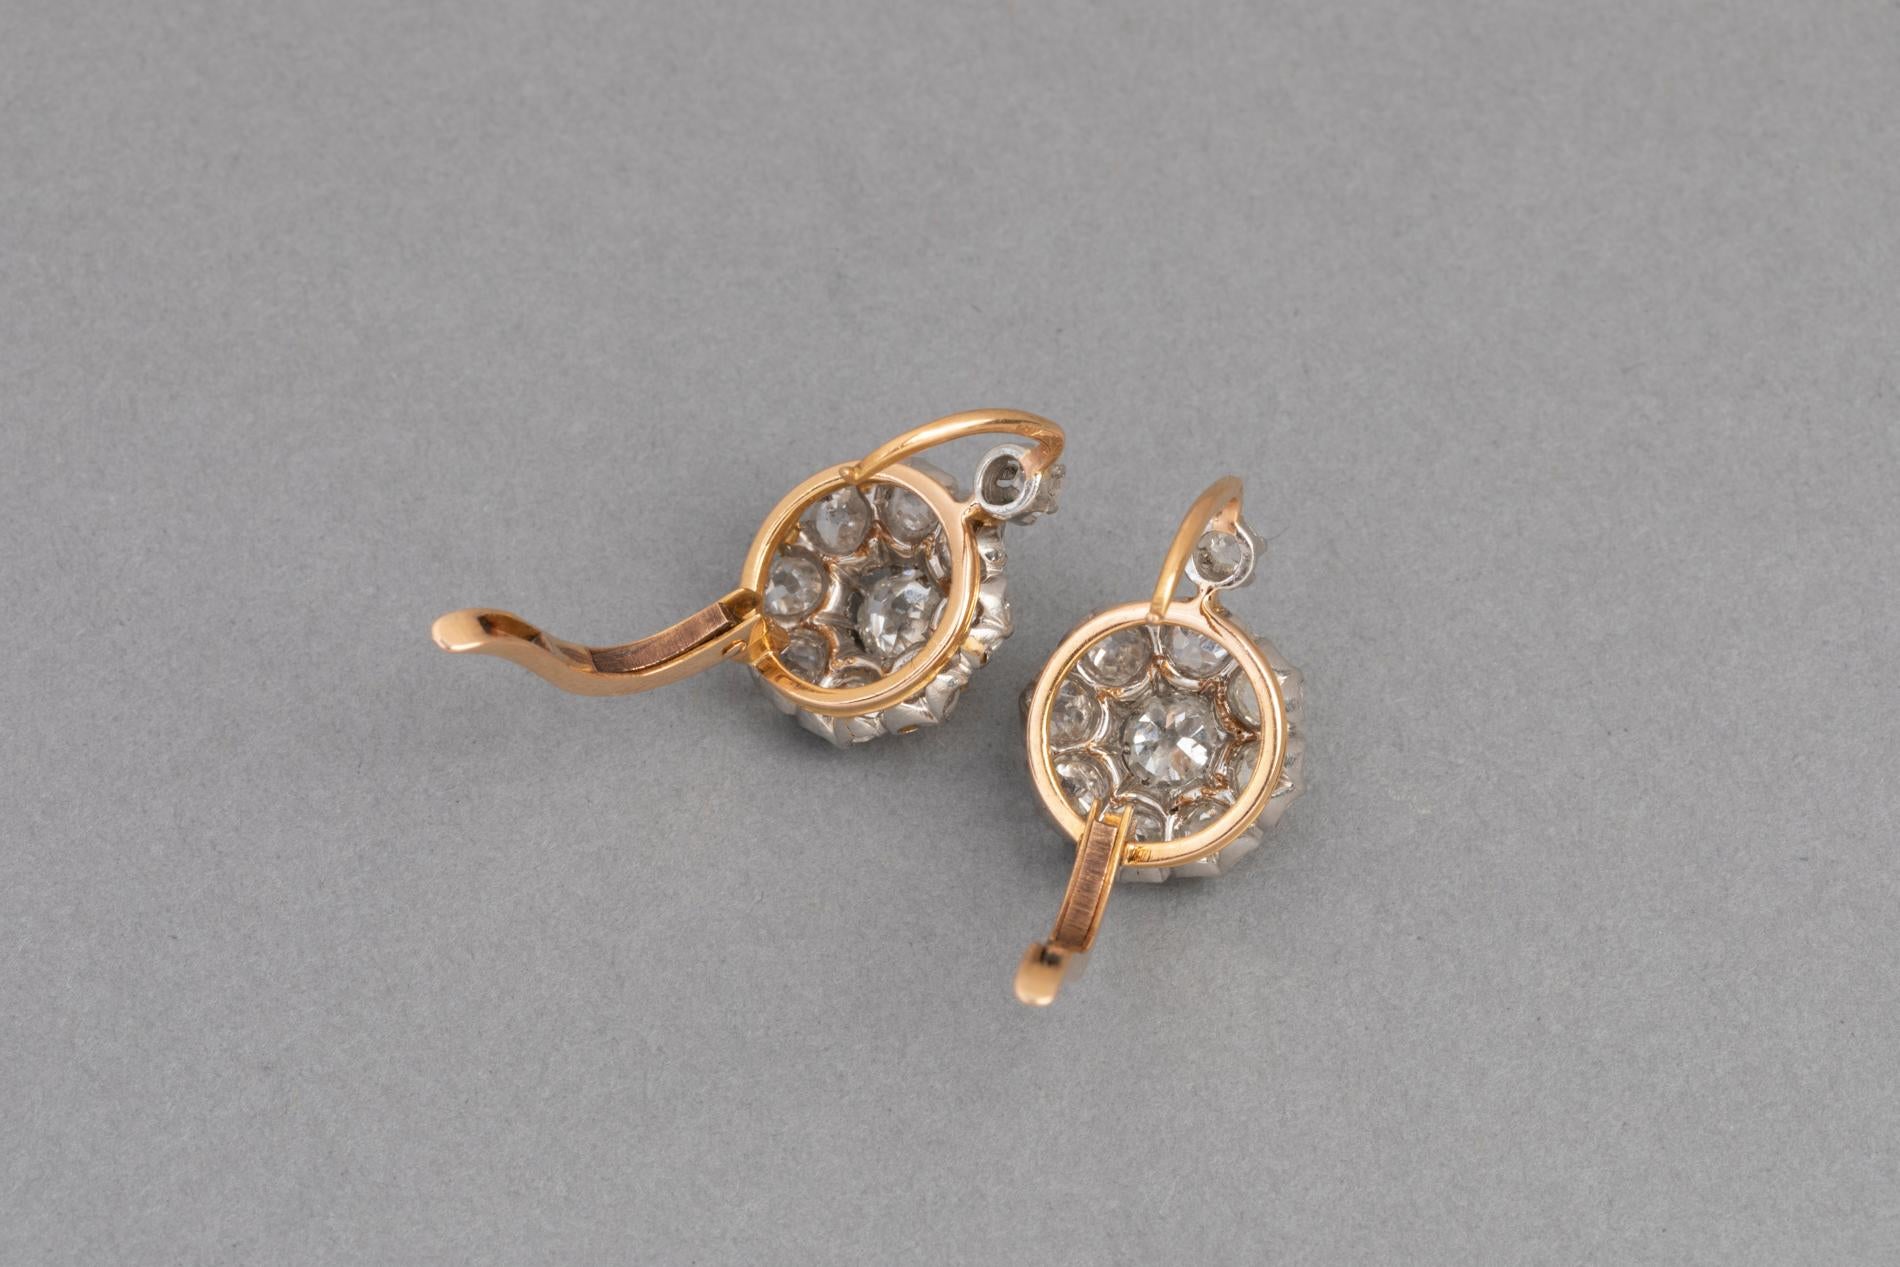 2 Carat Antique French Earrings, Gold Platinum and Diamonds 1